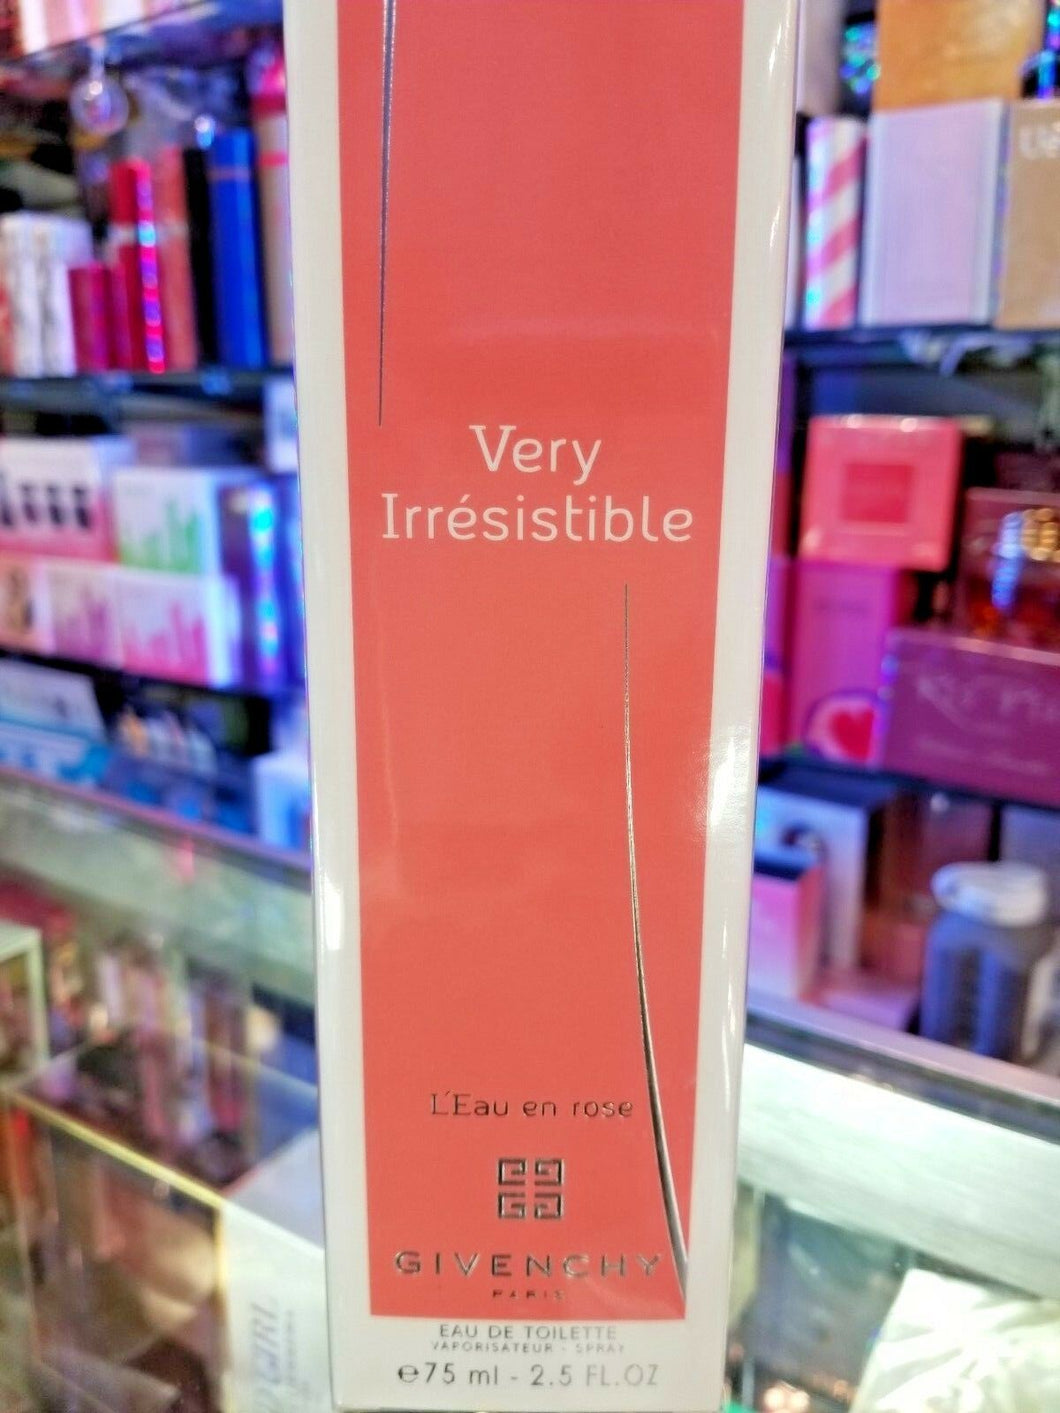 Very Irresistible Givenchy - L'Eau en rose 2.5 oz EDT Spray Her * SEALED IN BOX - Perfume Gallery